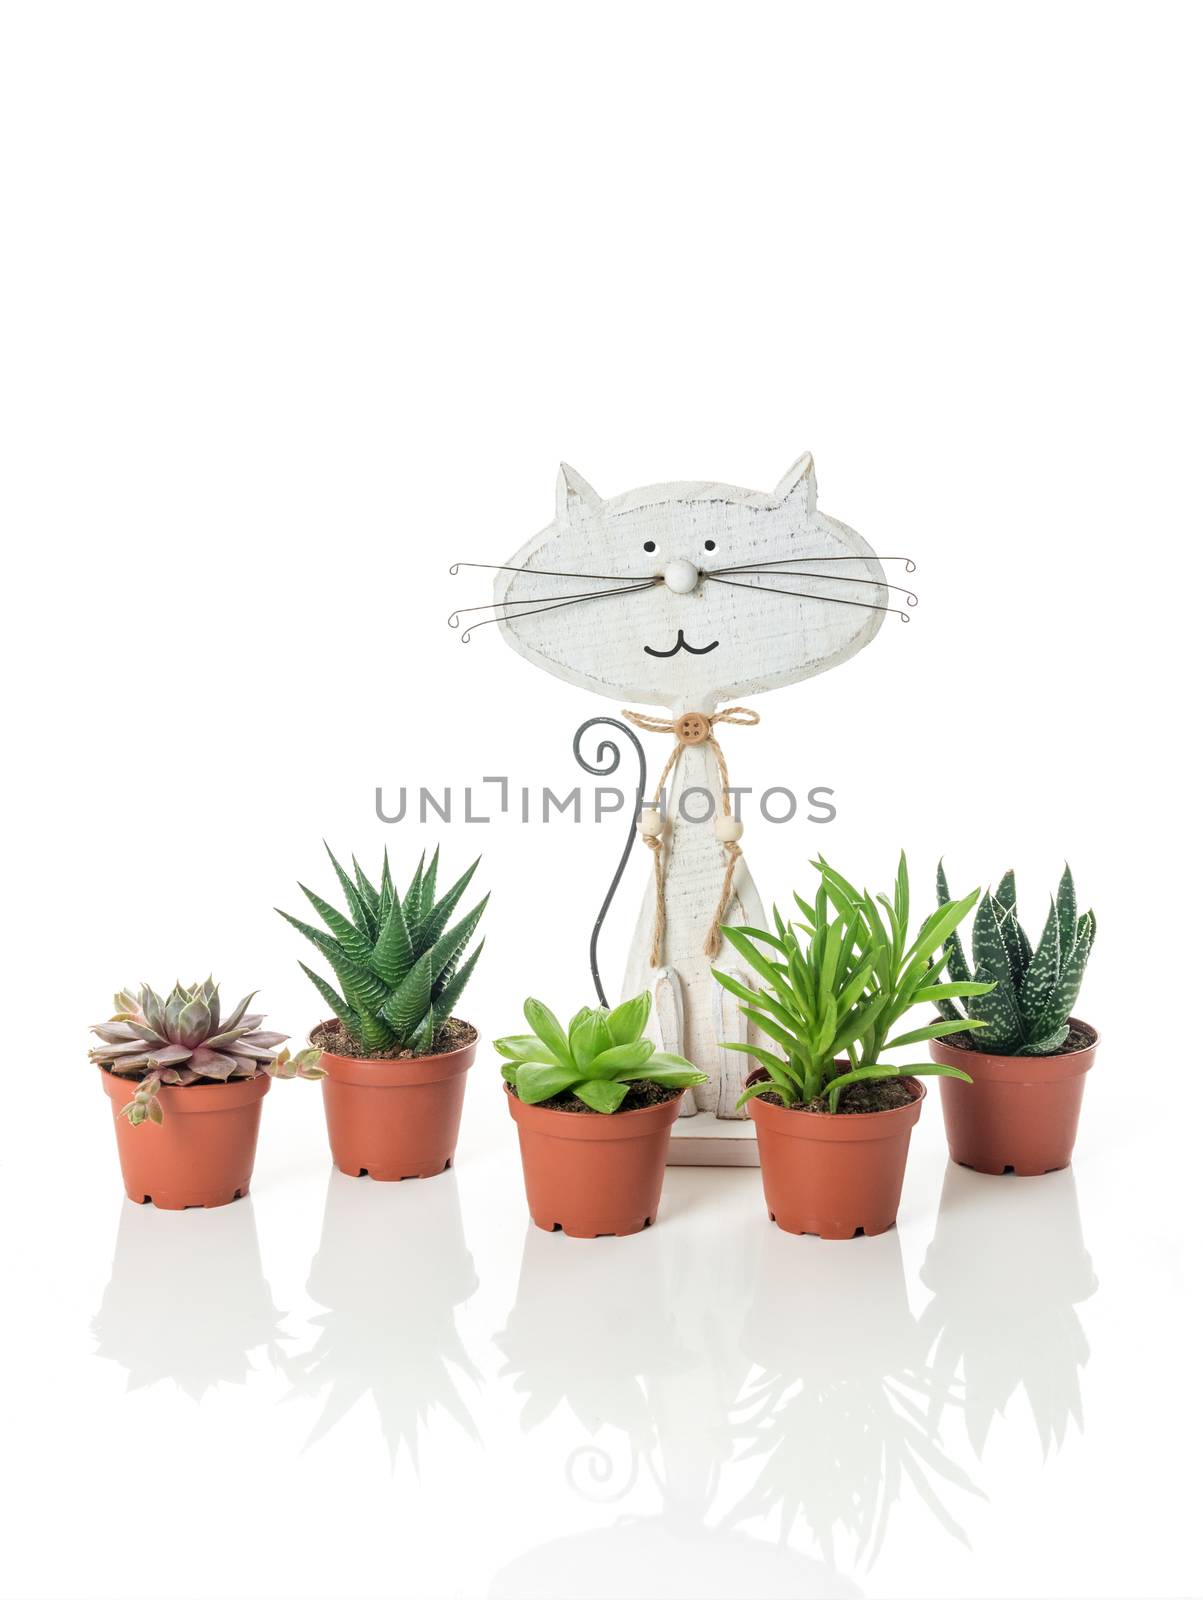 Succulent plants and wooden cat on white background by anikasalsera